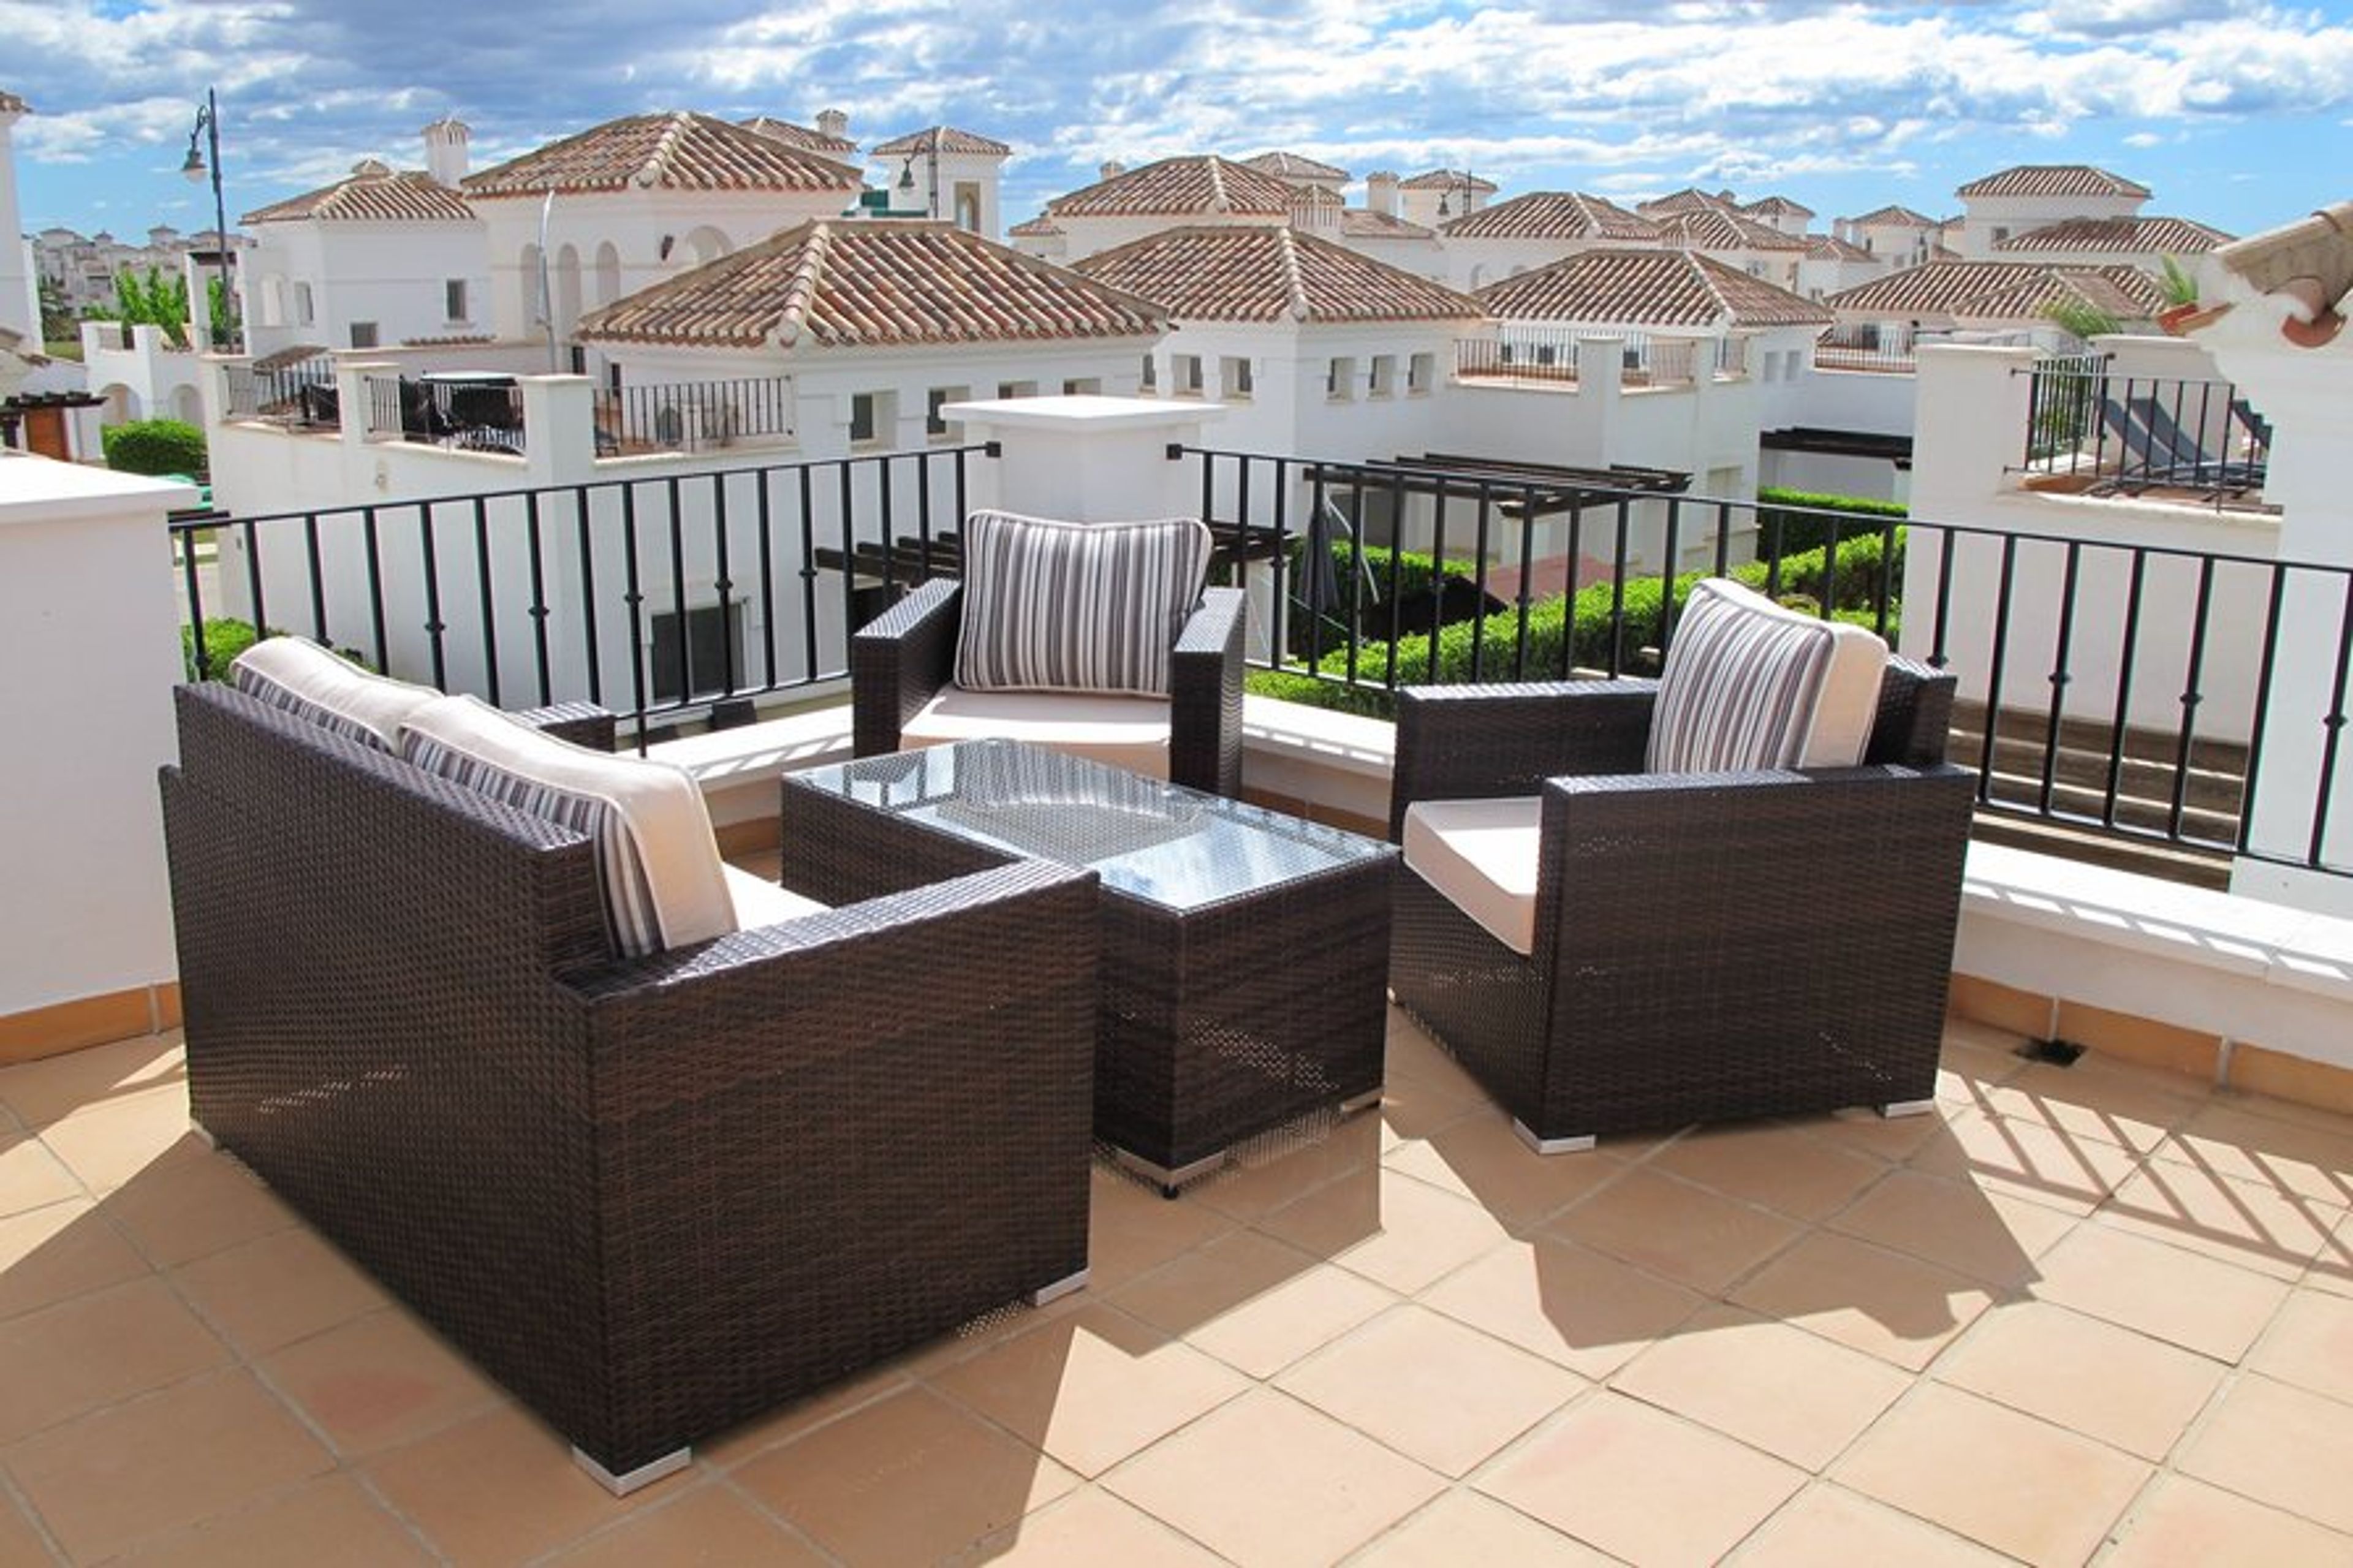 Sunny roof terrace with patio furniture shown - perfect for breakfast!